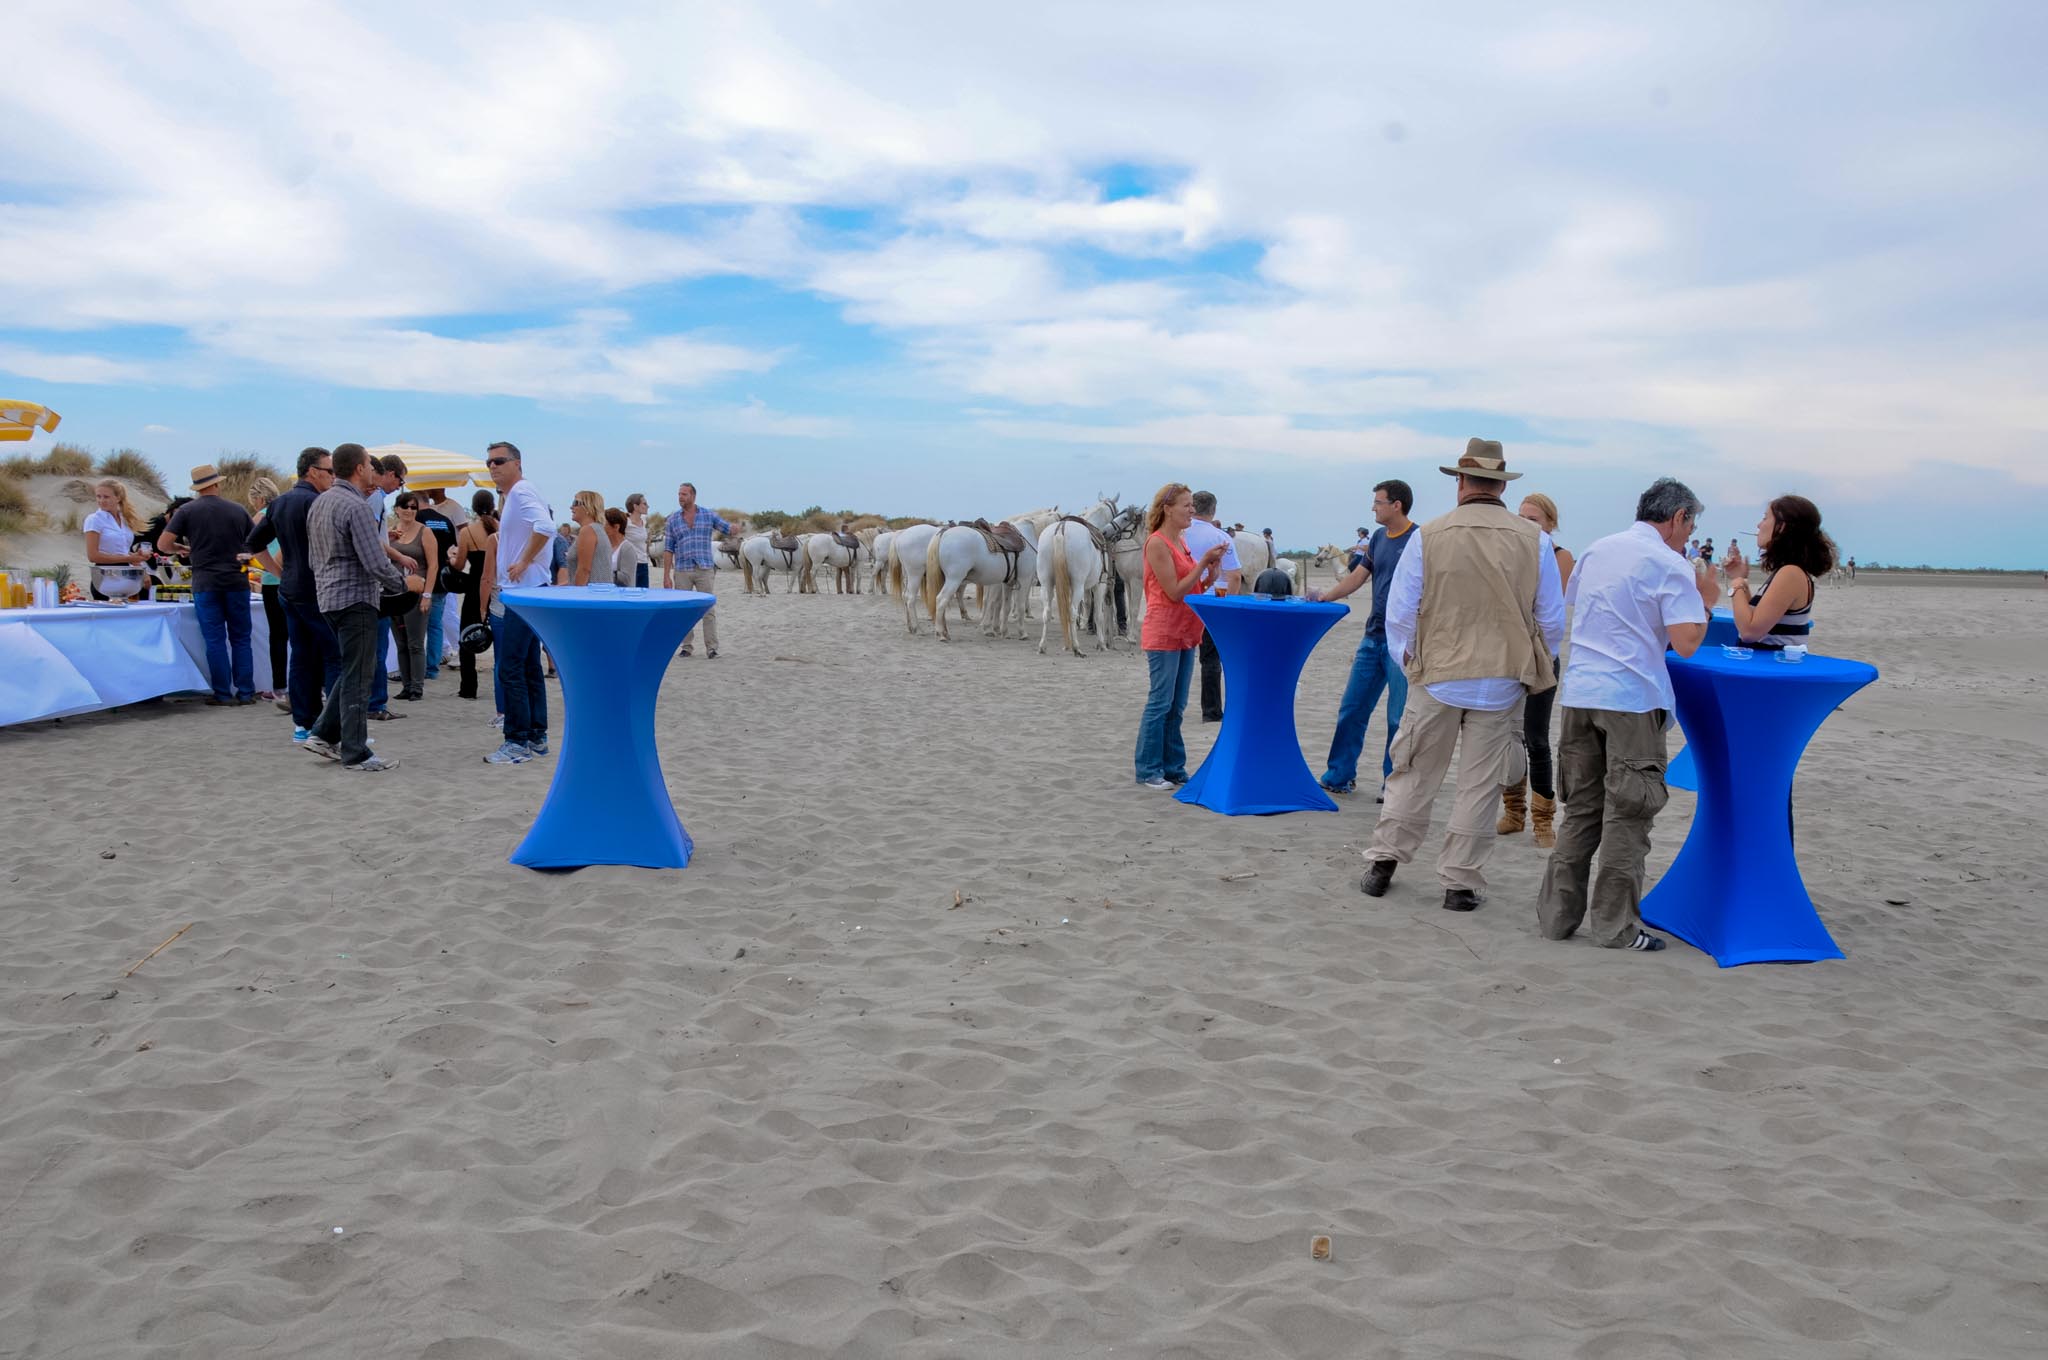 Networking after the seminar with your colleagues on the beach in Camargue